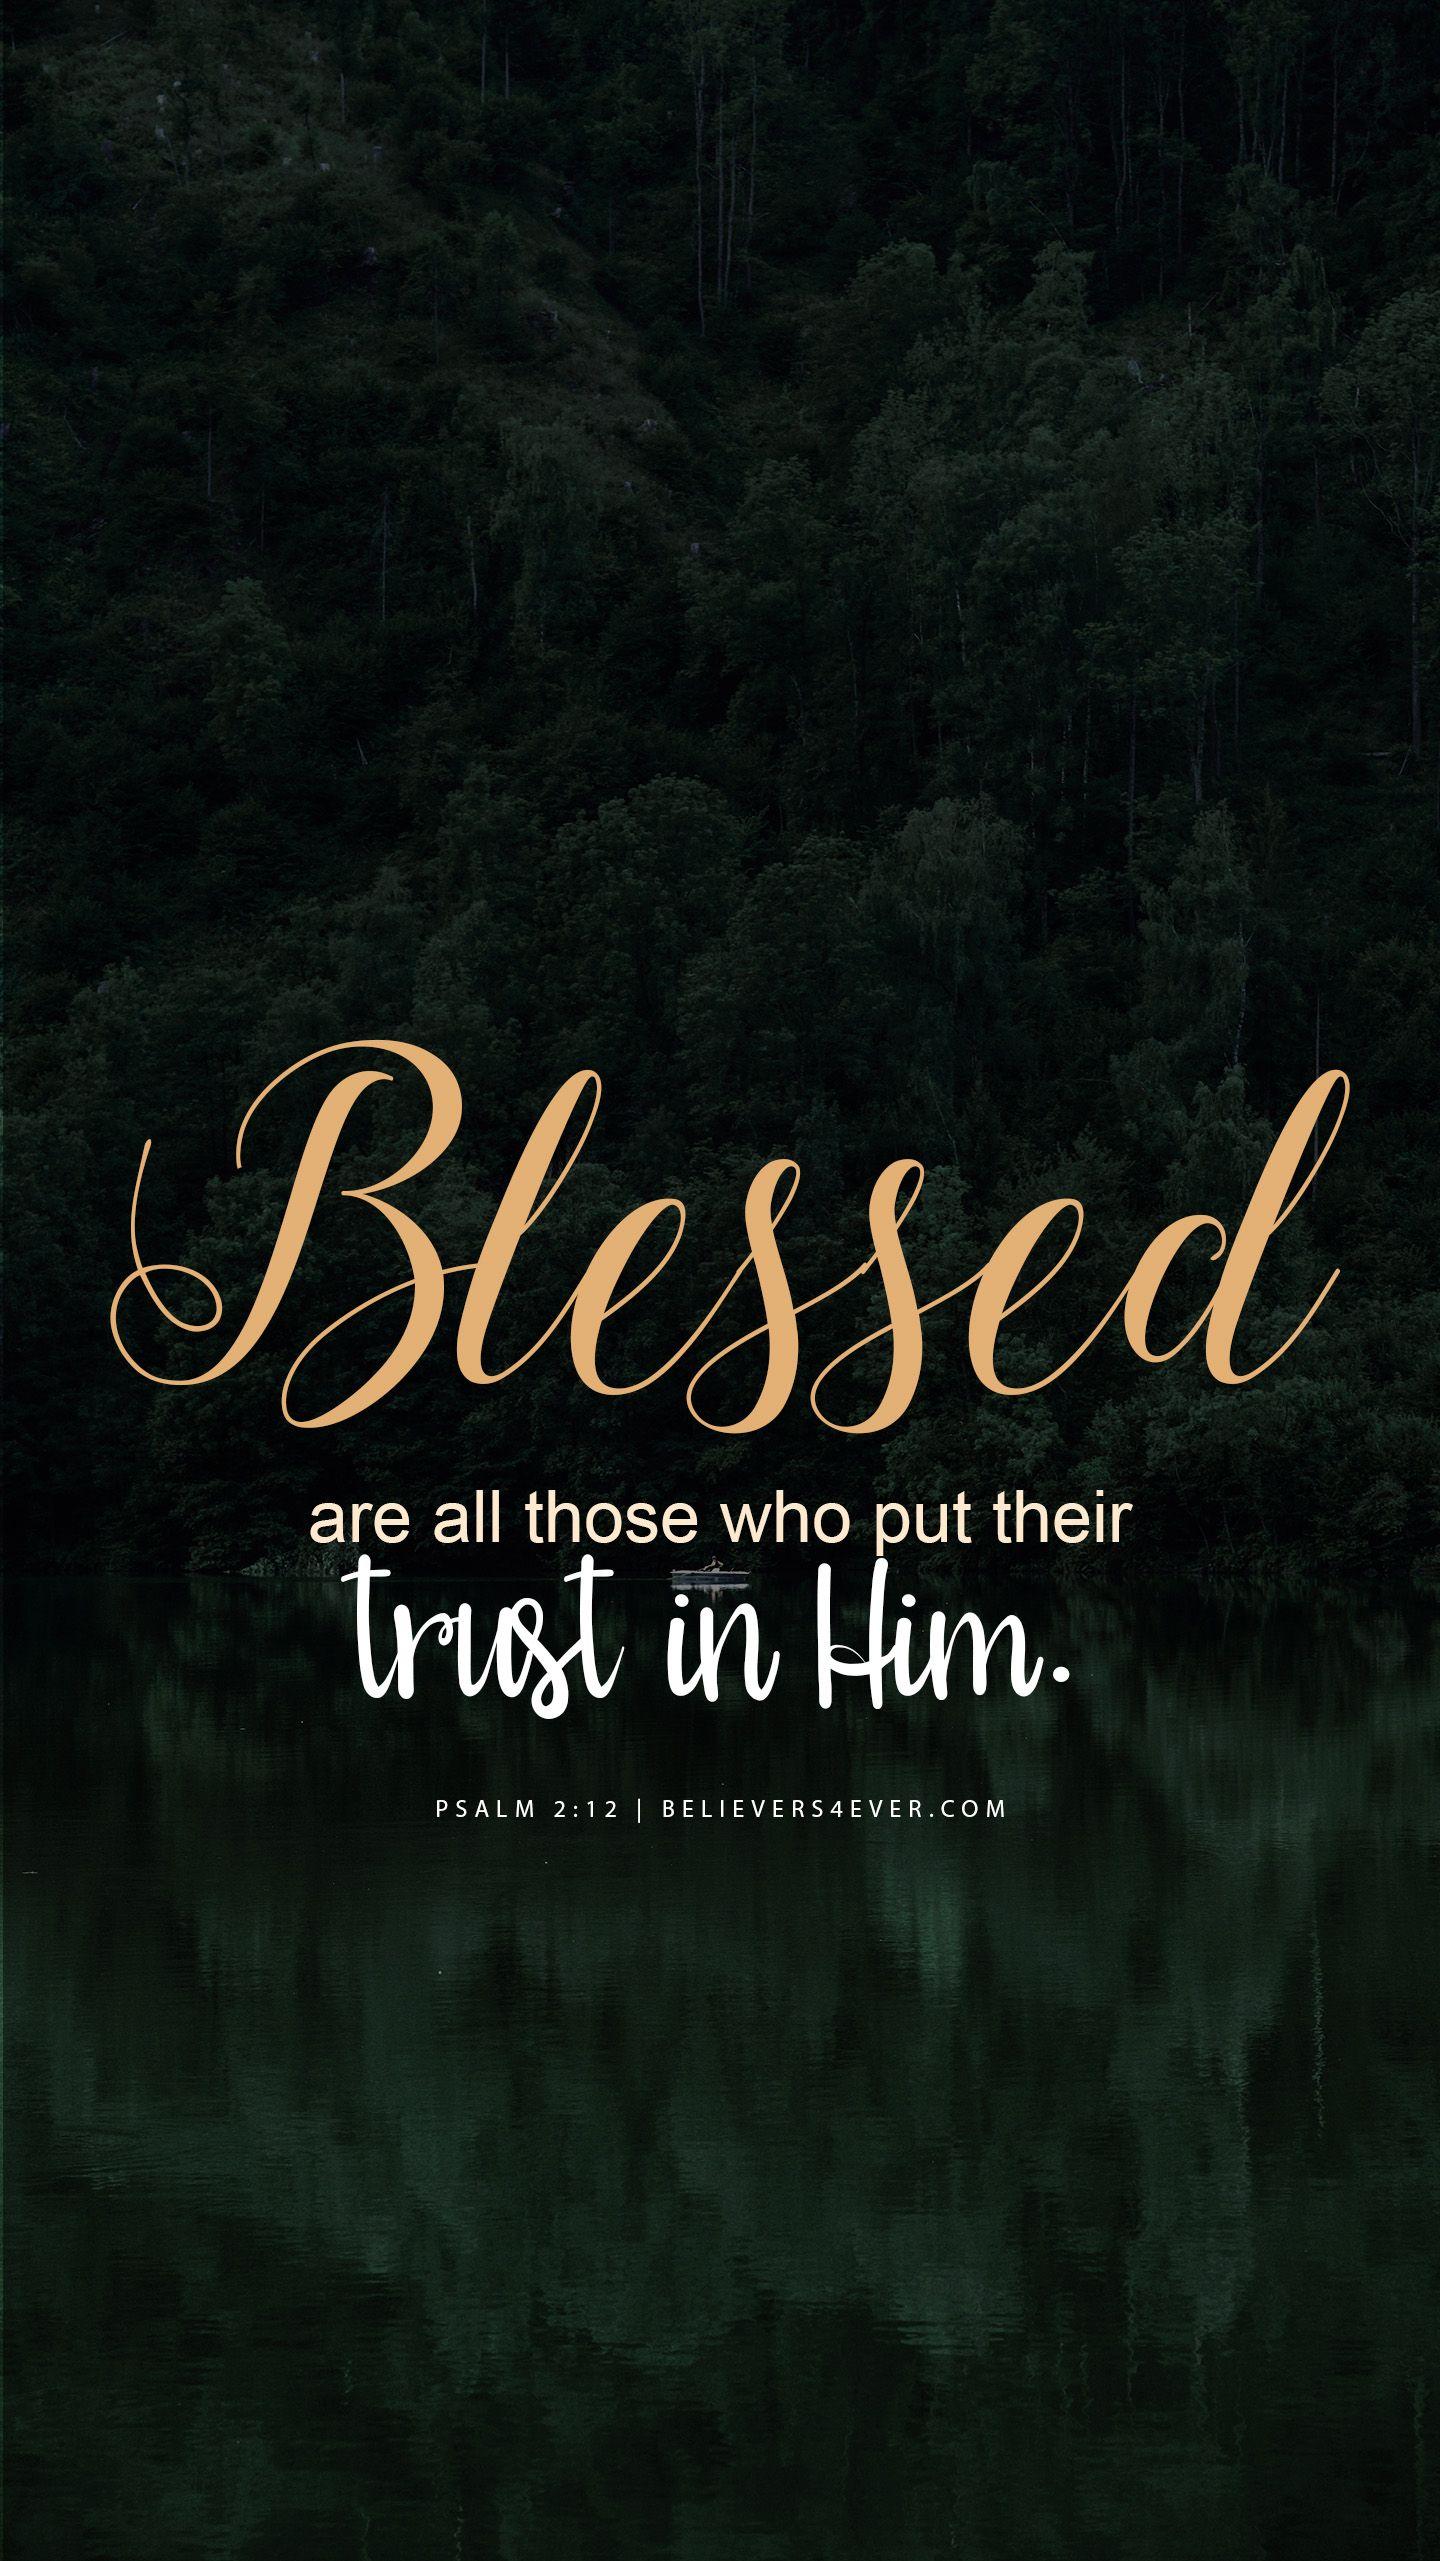 Blessed are all those who put their trust in Him. Psalm 2:12. Free